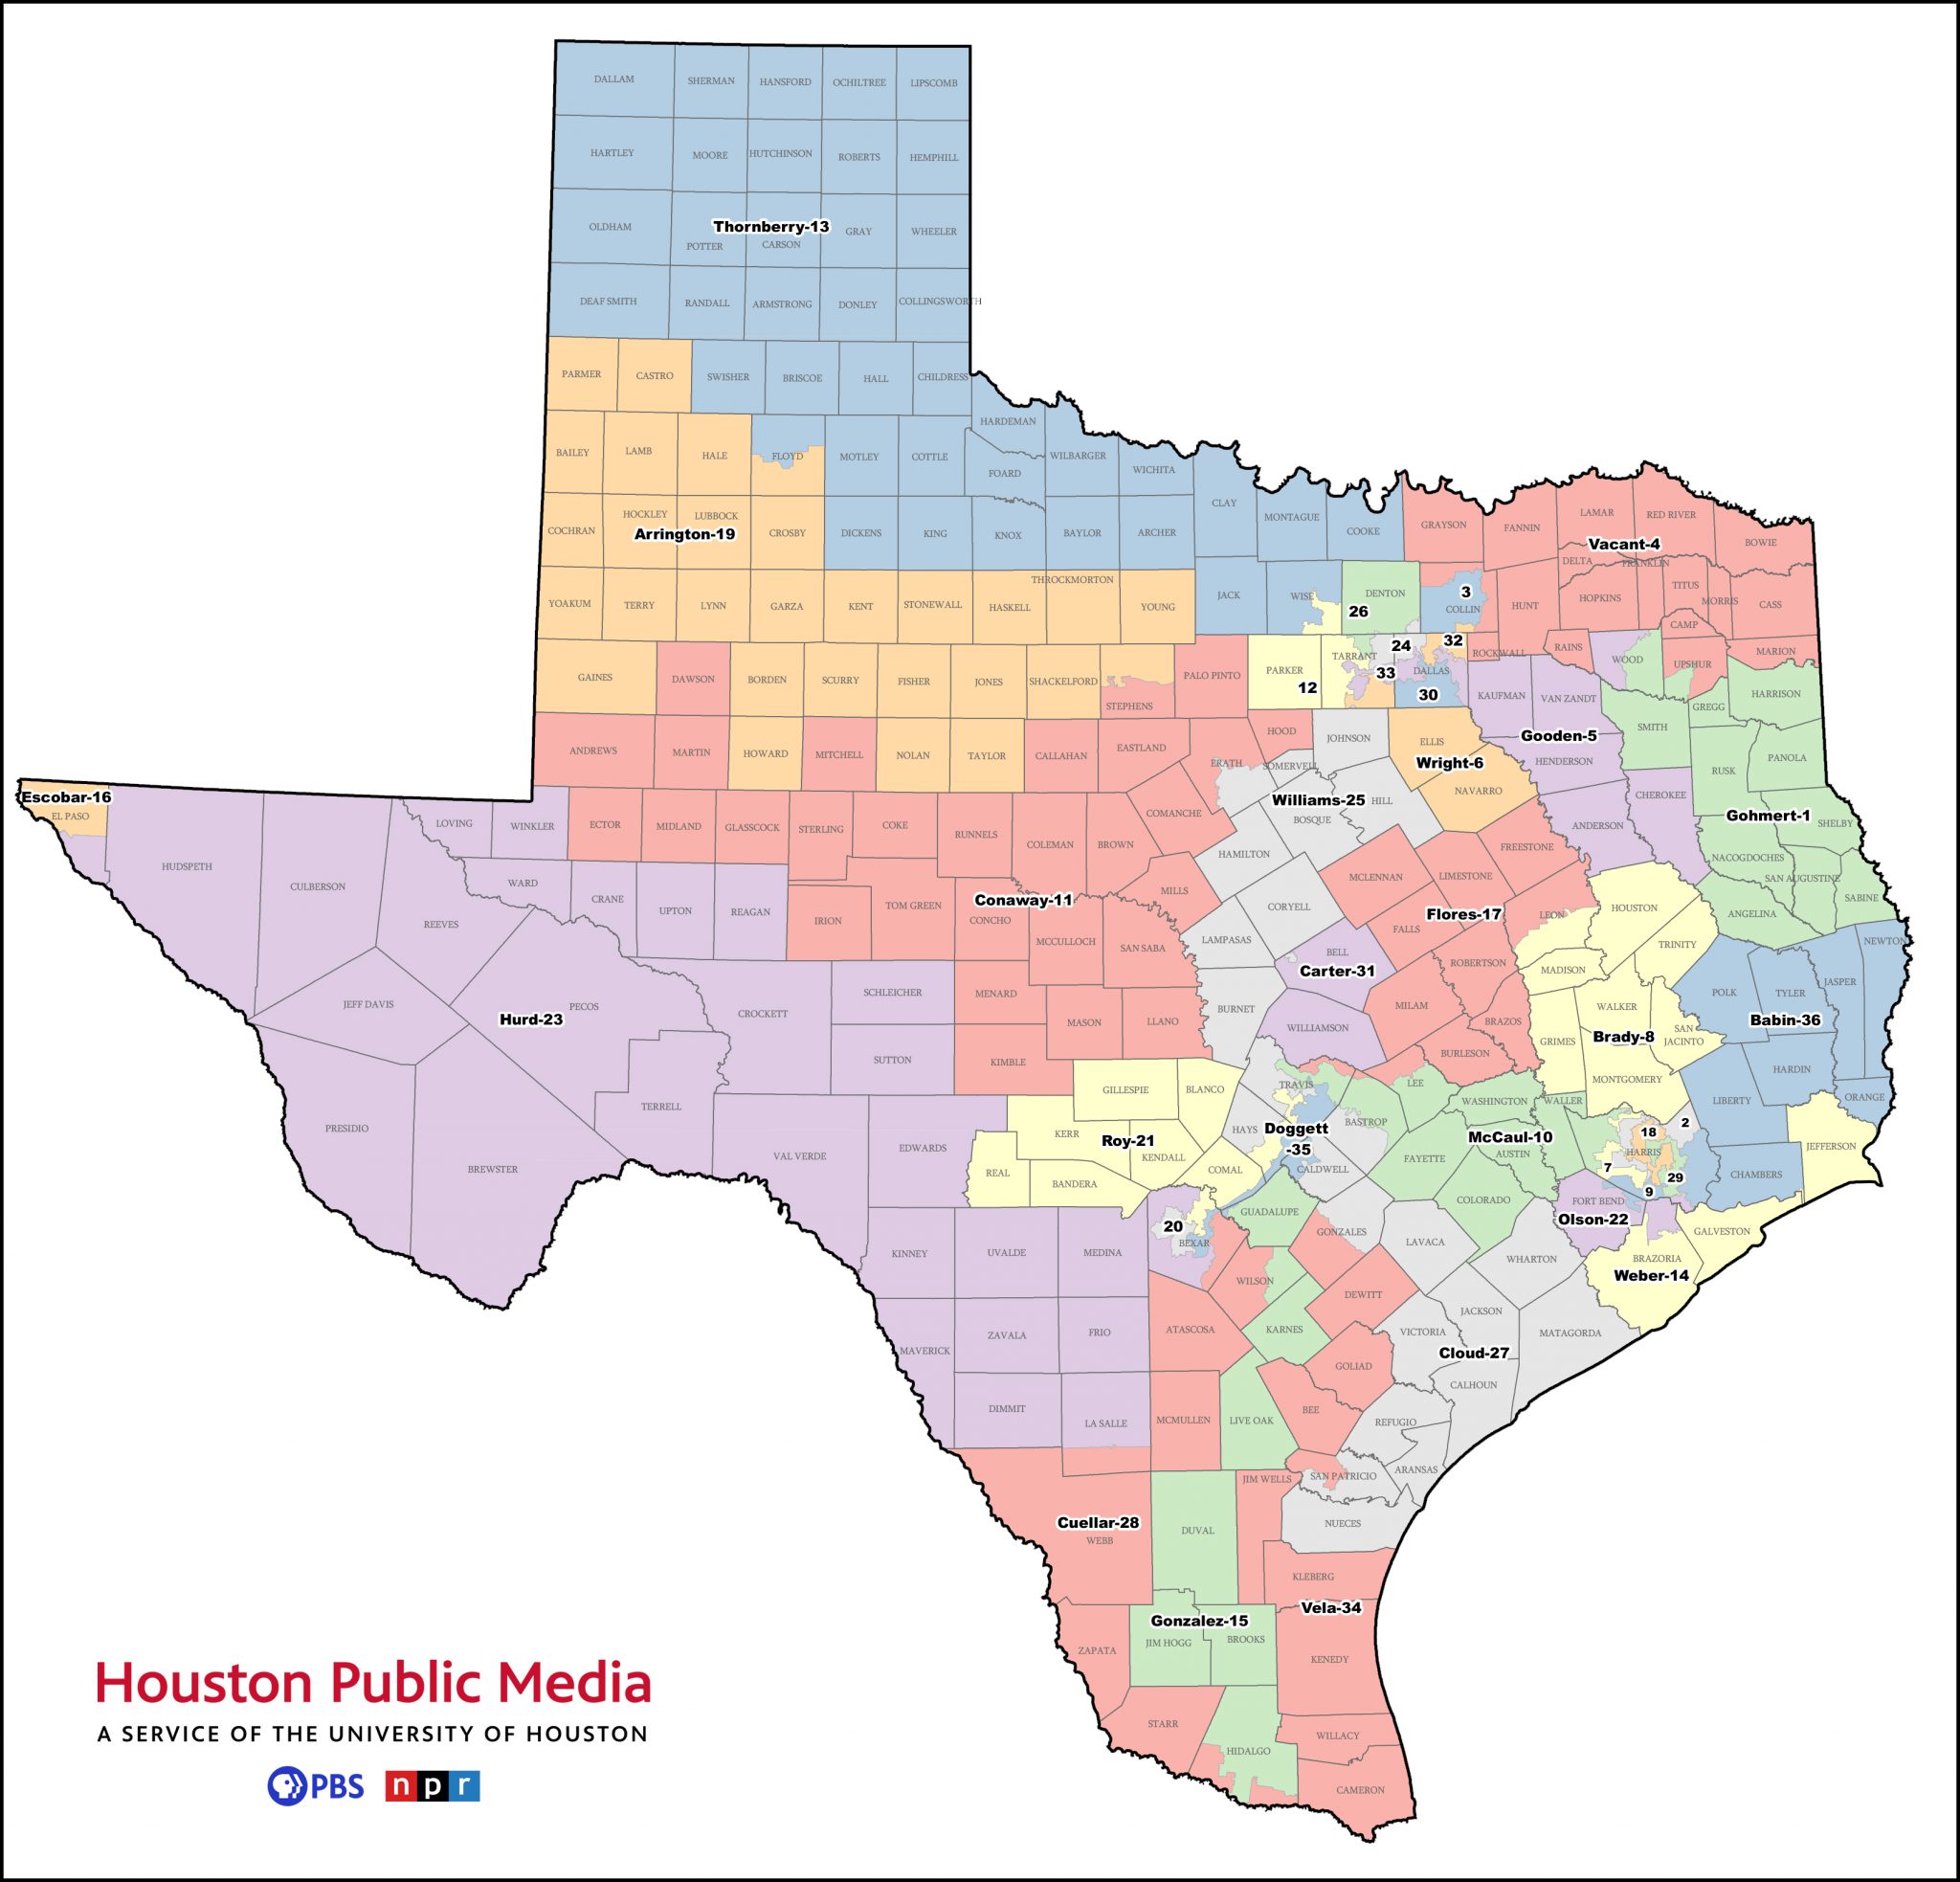 New Texas House District Map